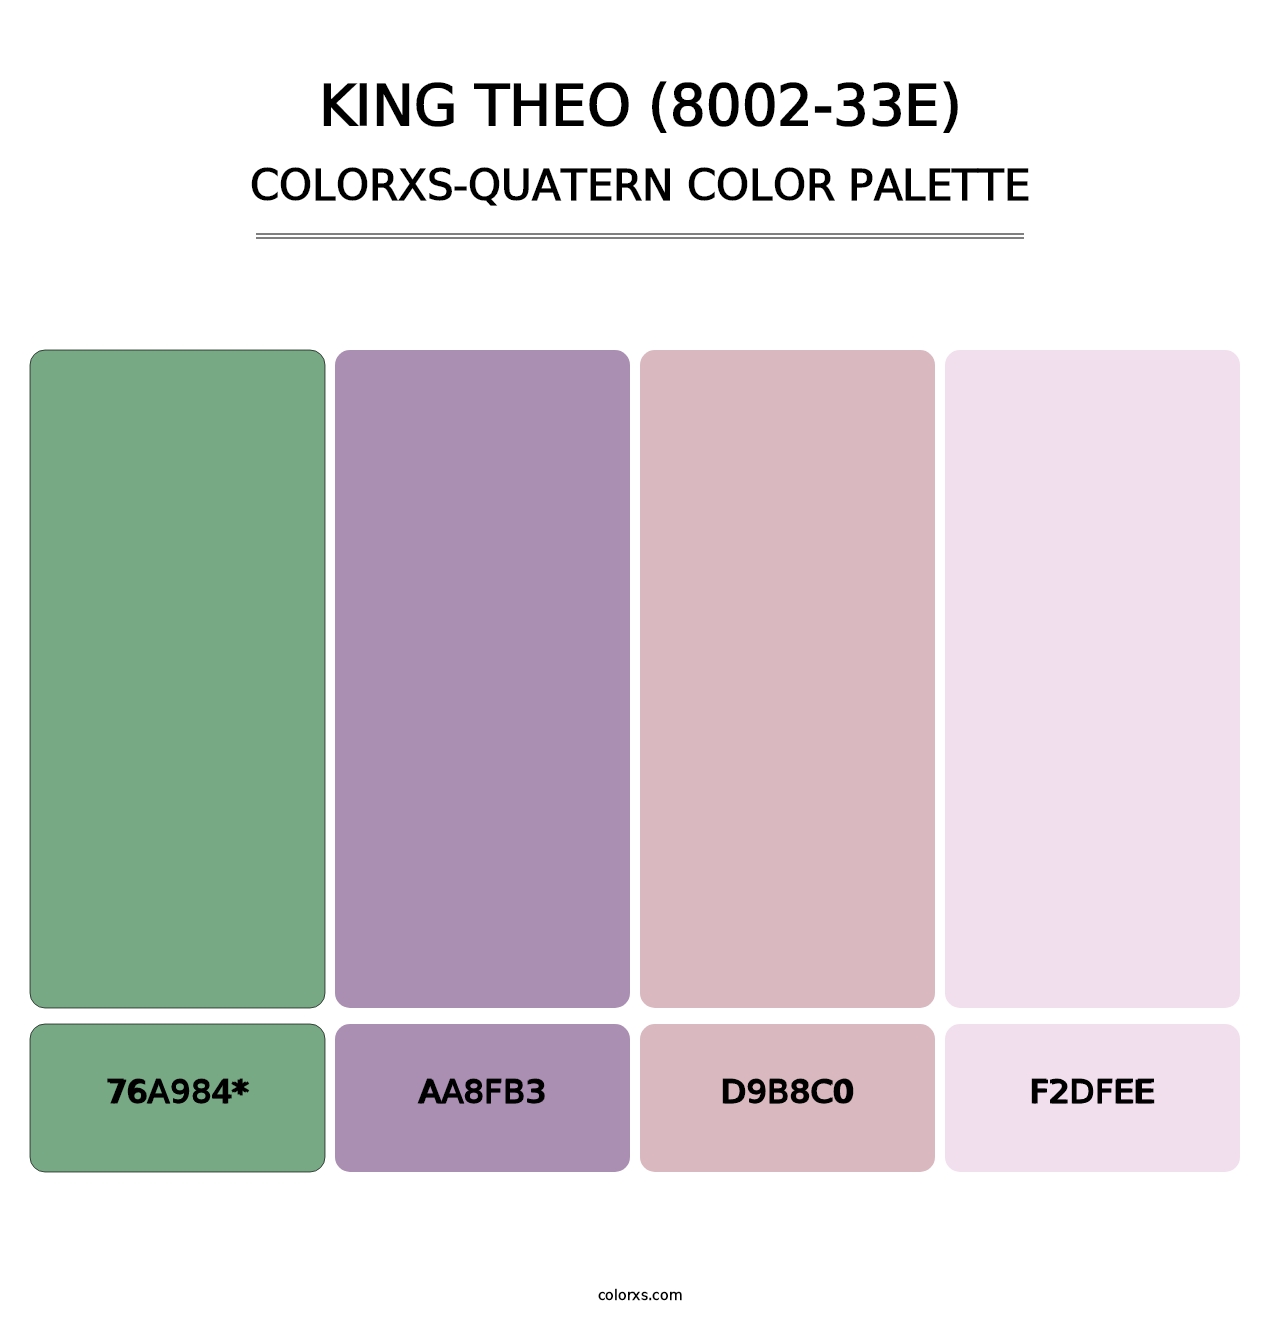 King Theo (8002-33E) - Colorxs Quatern Palette